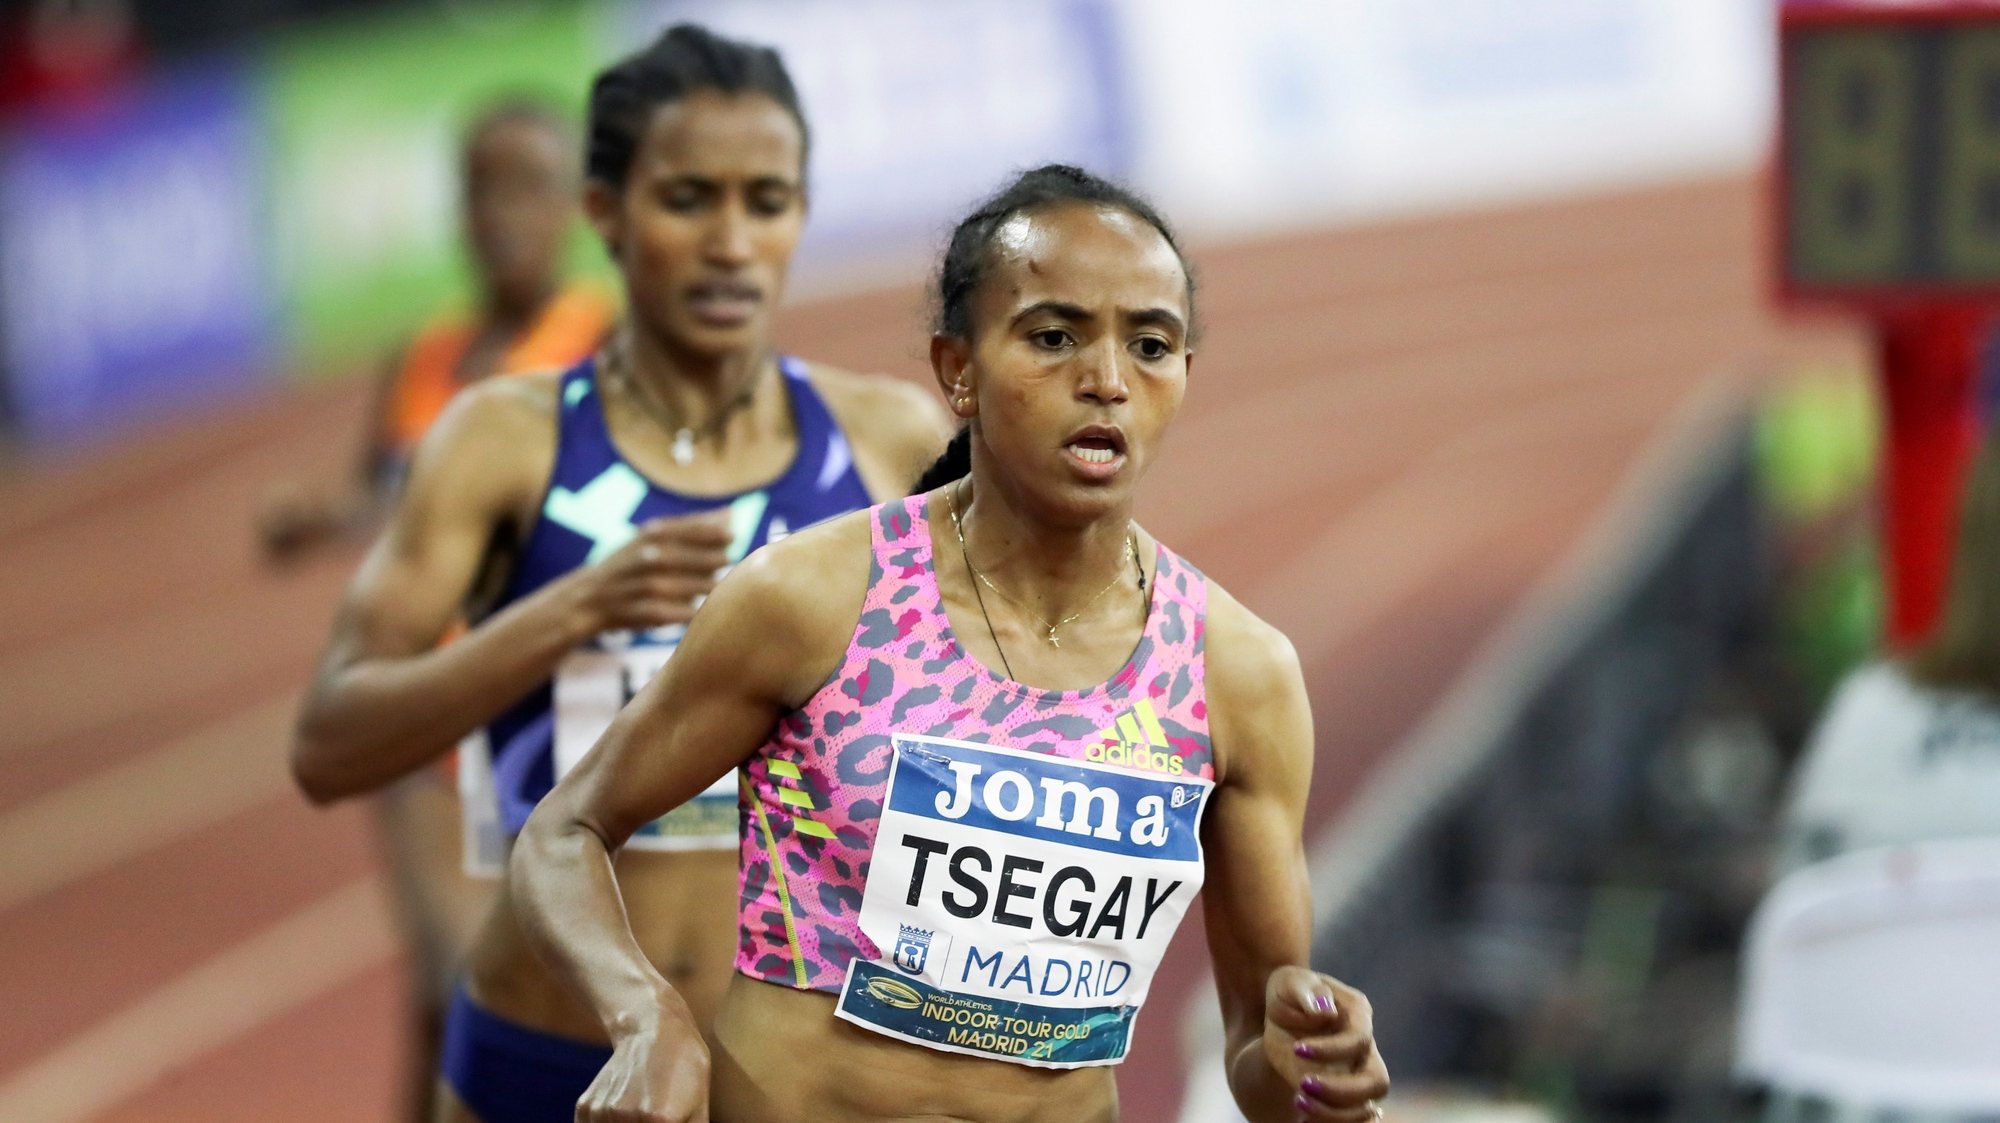 epa09034460 Gudaf Tsegay of Ethiopia on her way to win the gold in the 3000 meters final of the Villa de Madrid International Athletic Competition in Madrid, Spain, 24 February 2021, in the framework of the World Athletics Indoor Tour Gold.  EPA/Kiko Huesca